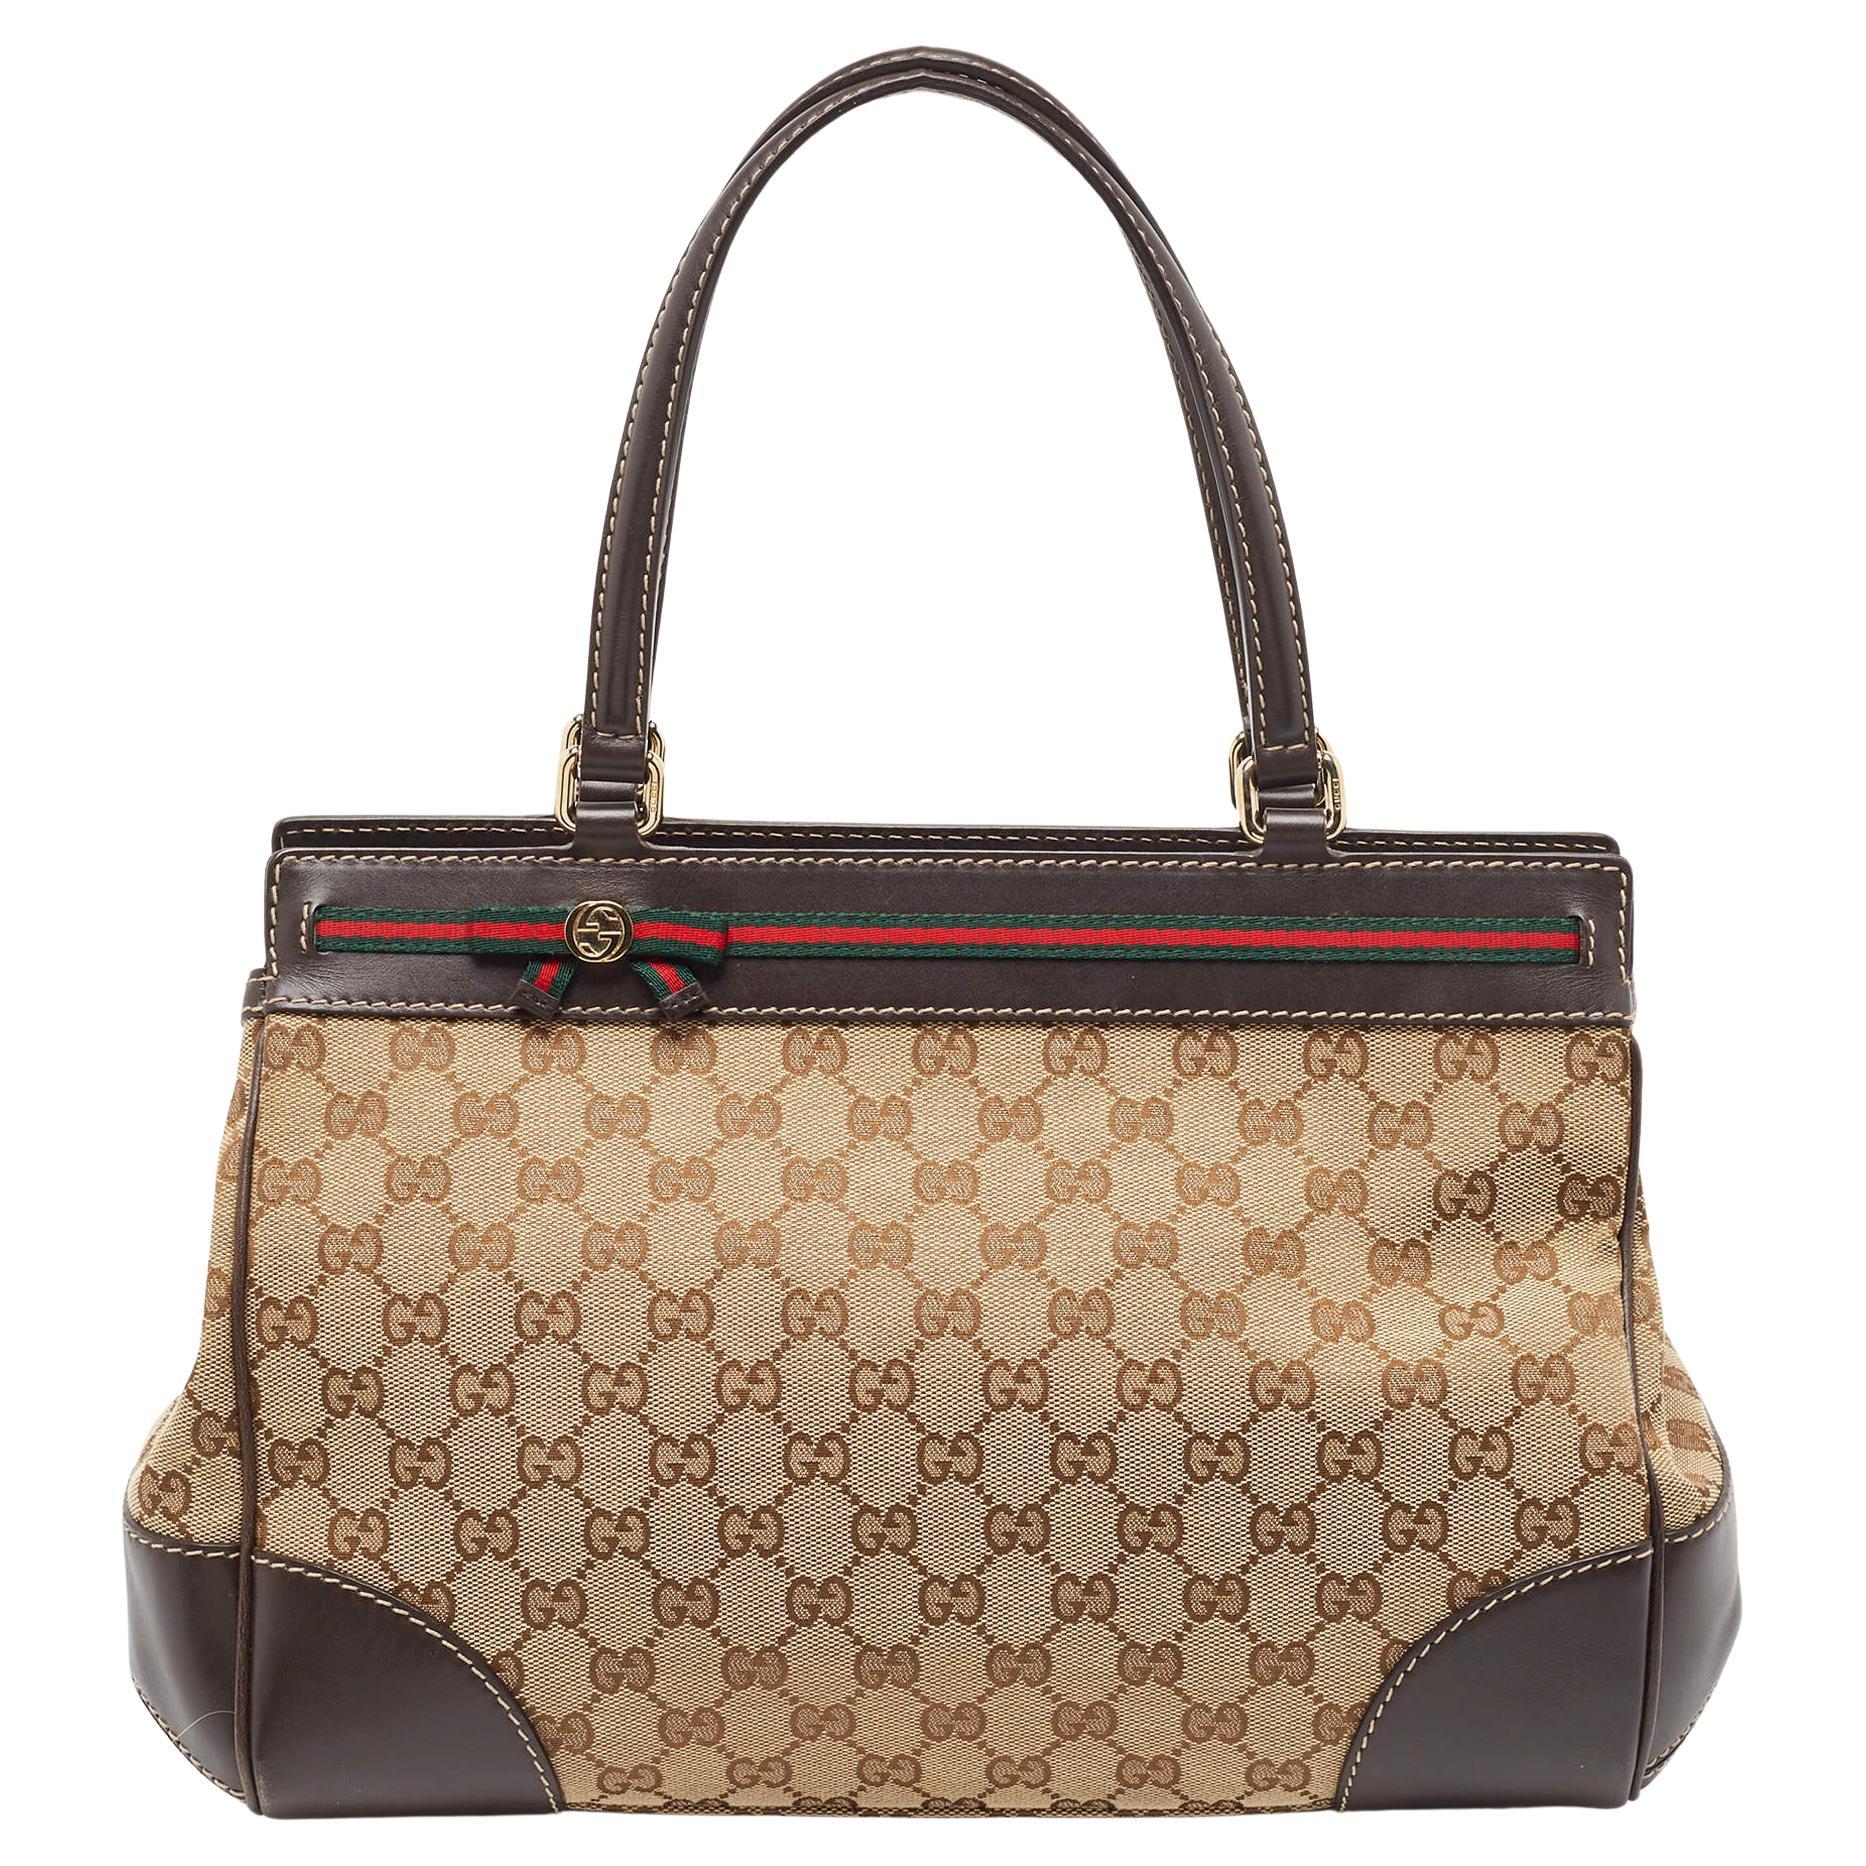 Gucci Brown/Beige GG Canvas and Leather Medium Mayfair Web Tote